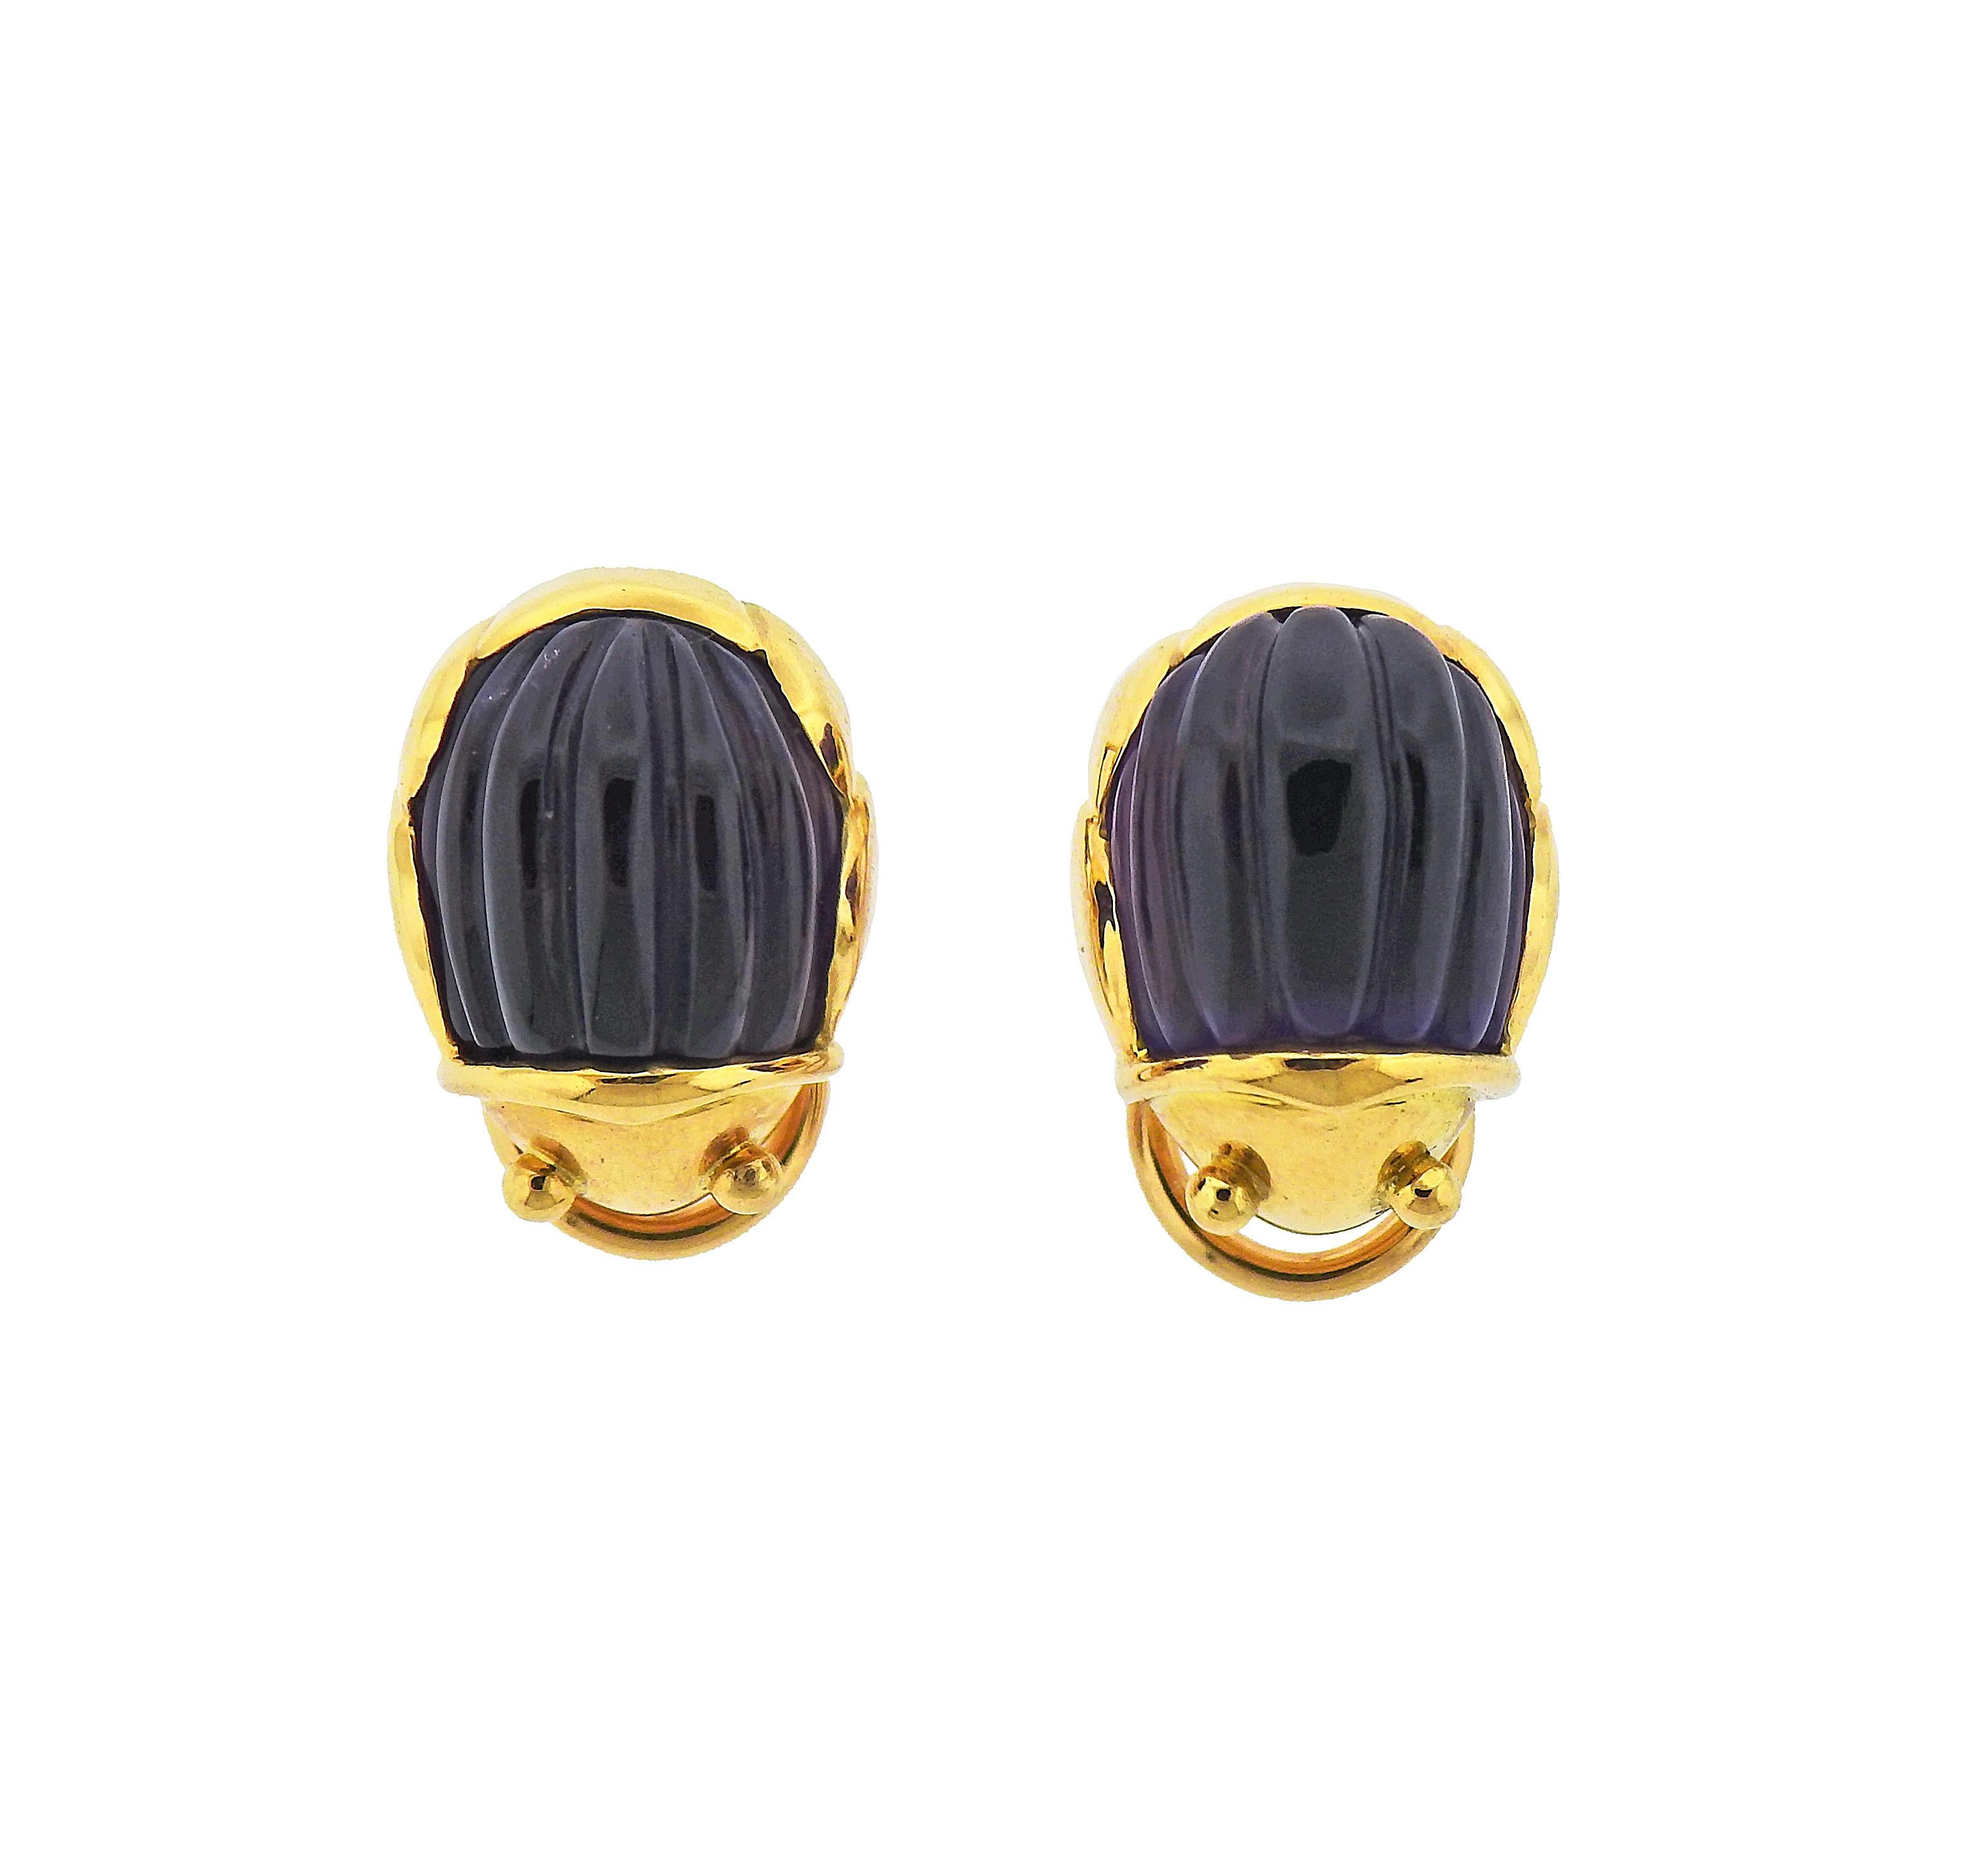 Set of beetle earrings and brooch, by Tiffany & Co in 18k gold and platinum, set with carved amethyst and diamonds. Earrings measure 16mm x 12mm, brooch - 23mm x 16mm. Marked: 1983, Tiffany & Co, 750, pt950. Weight - 21.7 grams.